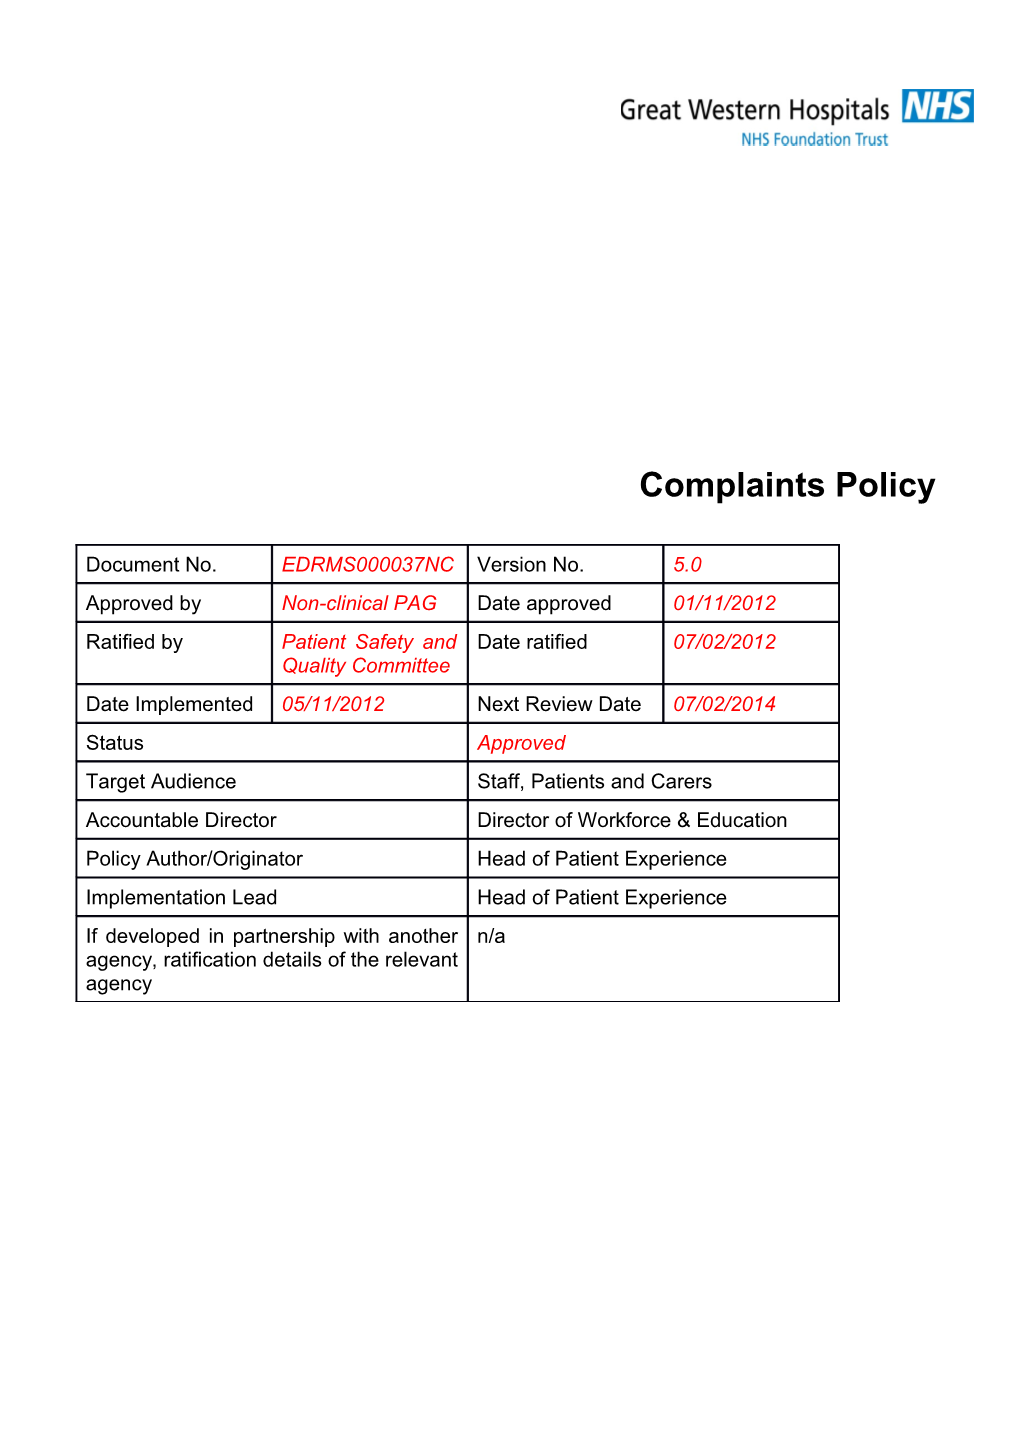 Document Title: Complaints Policy